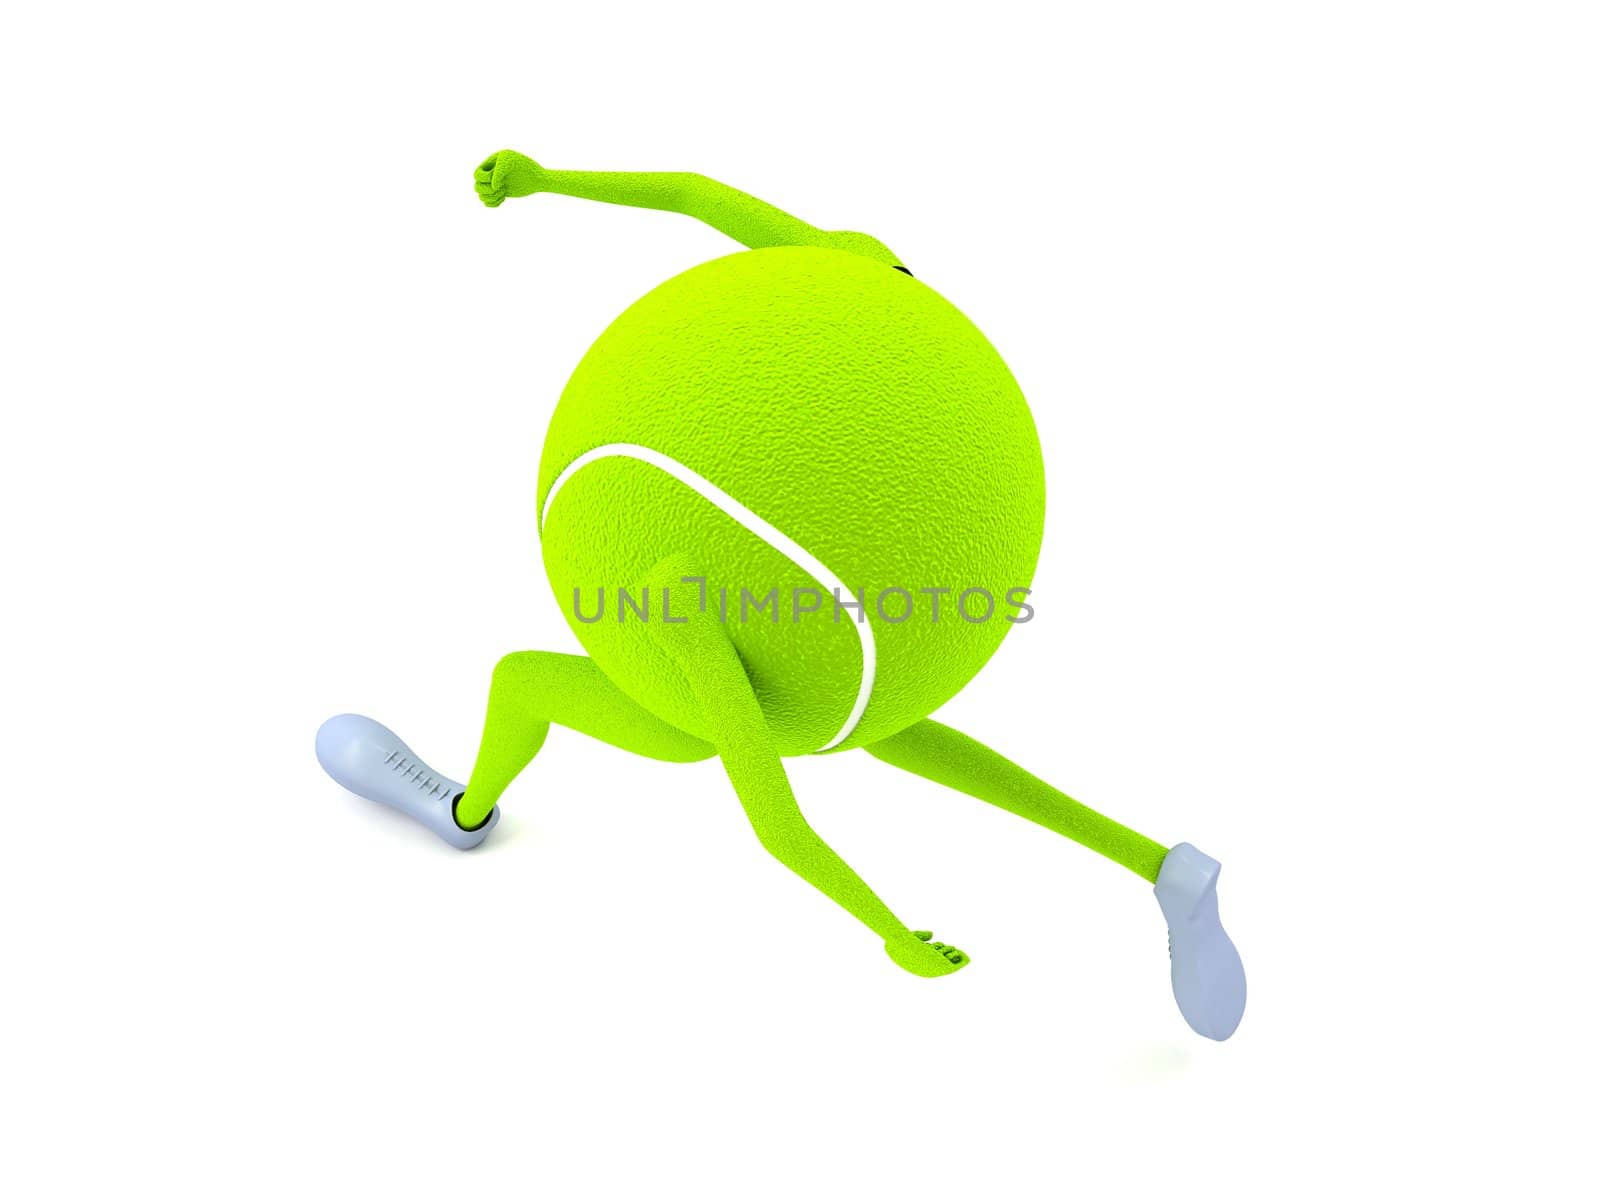 isolated three dimensional tennis ball with hands and legs


